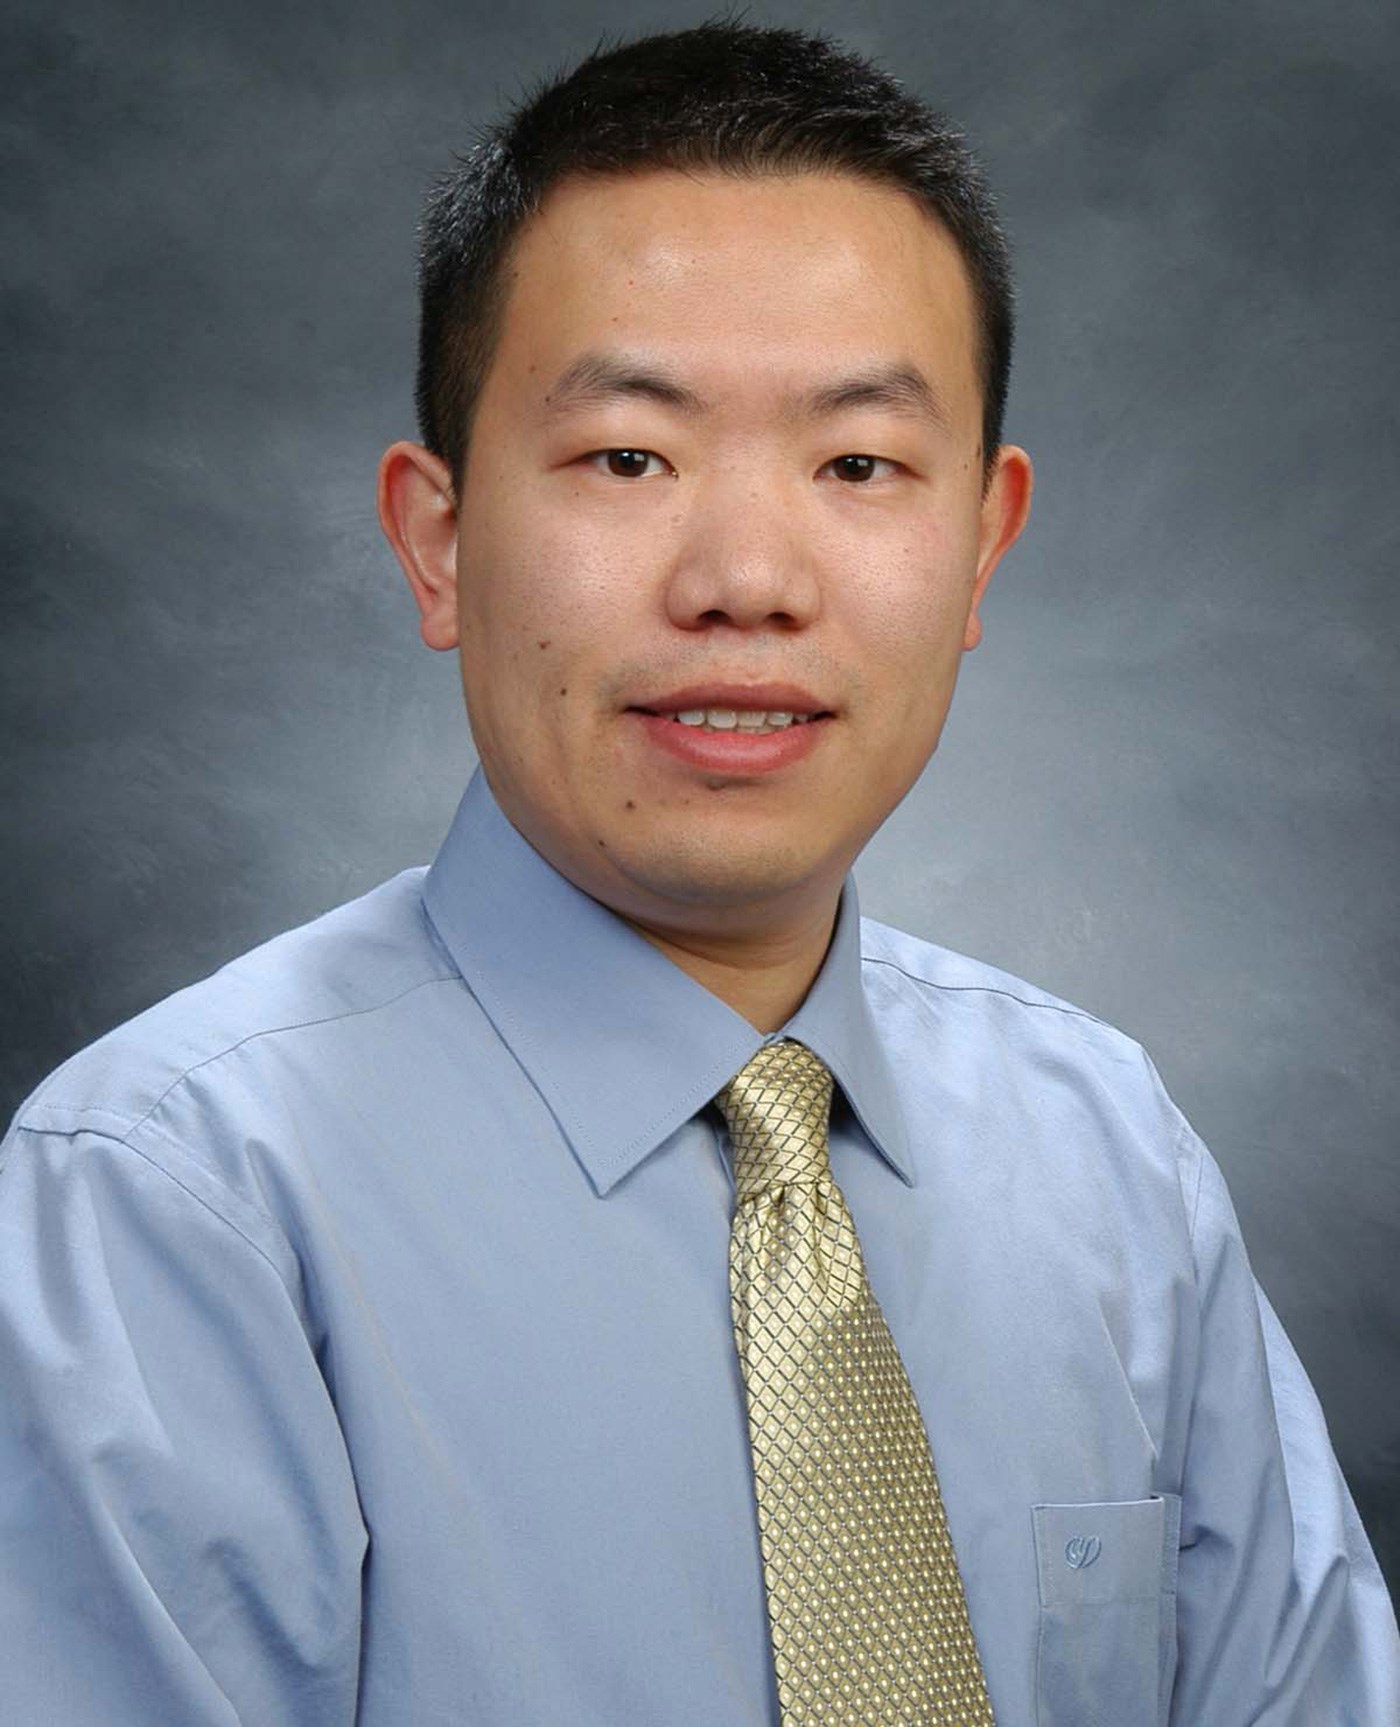 Yan Luo is a Professor in the Francis College of Engineering's Electrical & Computer Engineering Dept. at UMass Lowell